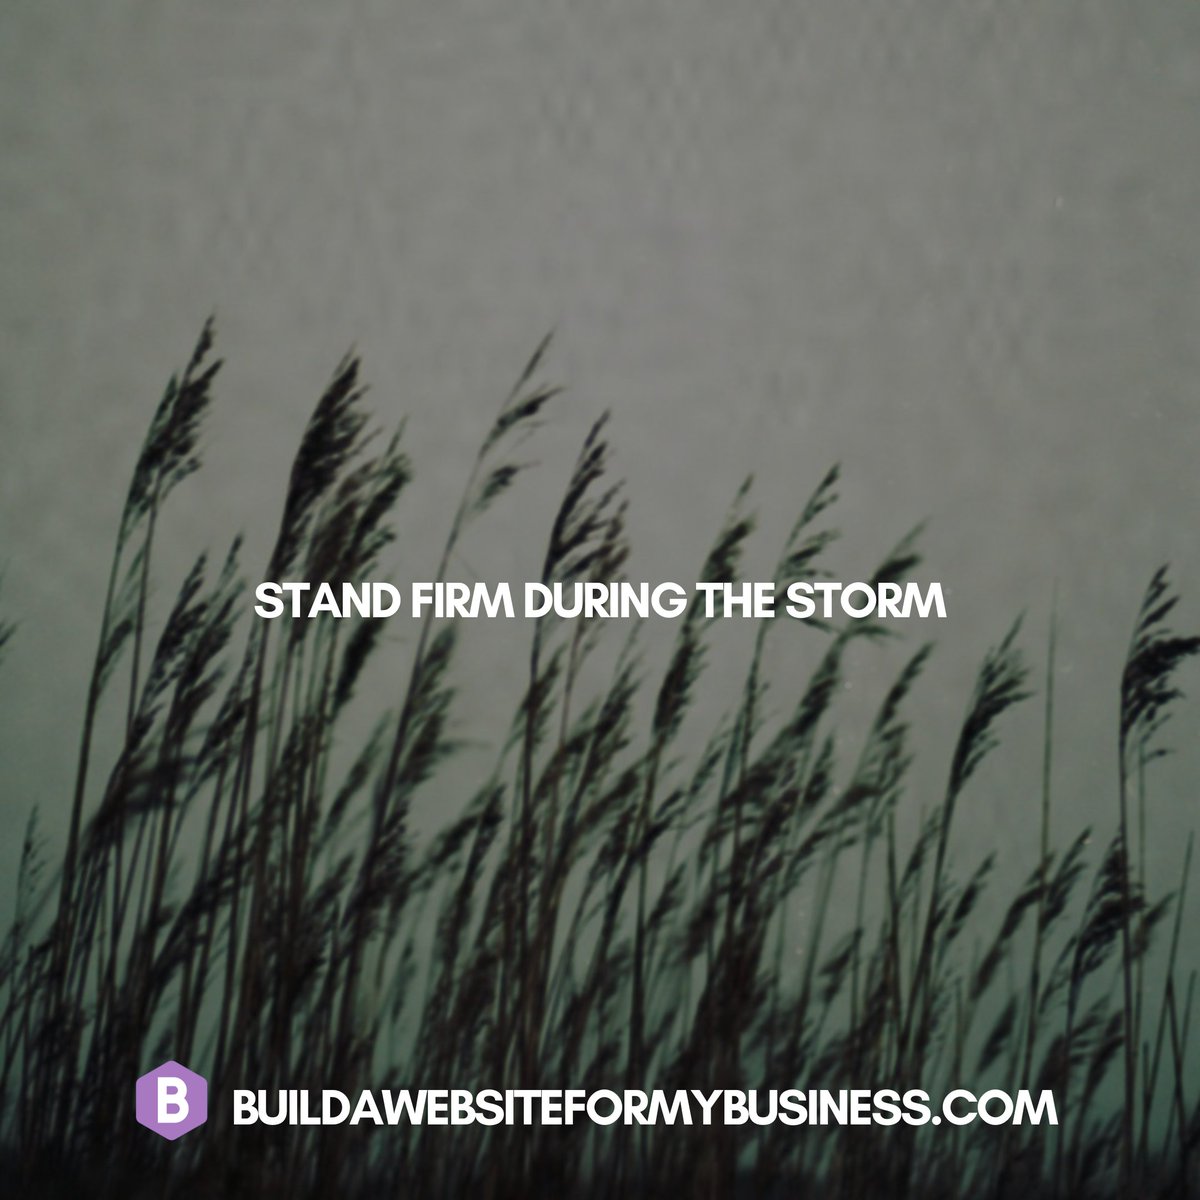 Stand Firm during the storm. Let us build your website while you build your business buildawebsiteformybusiness.com 
.
.
#quotes #InspirationDaily #QuoteOfTheDay #MotivationalQuotes #InspirationalQuotes #Positivity #PositiveMindset #SelfImprovement #DreamBig #AchieveGreatness #StayMotiv